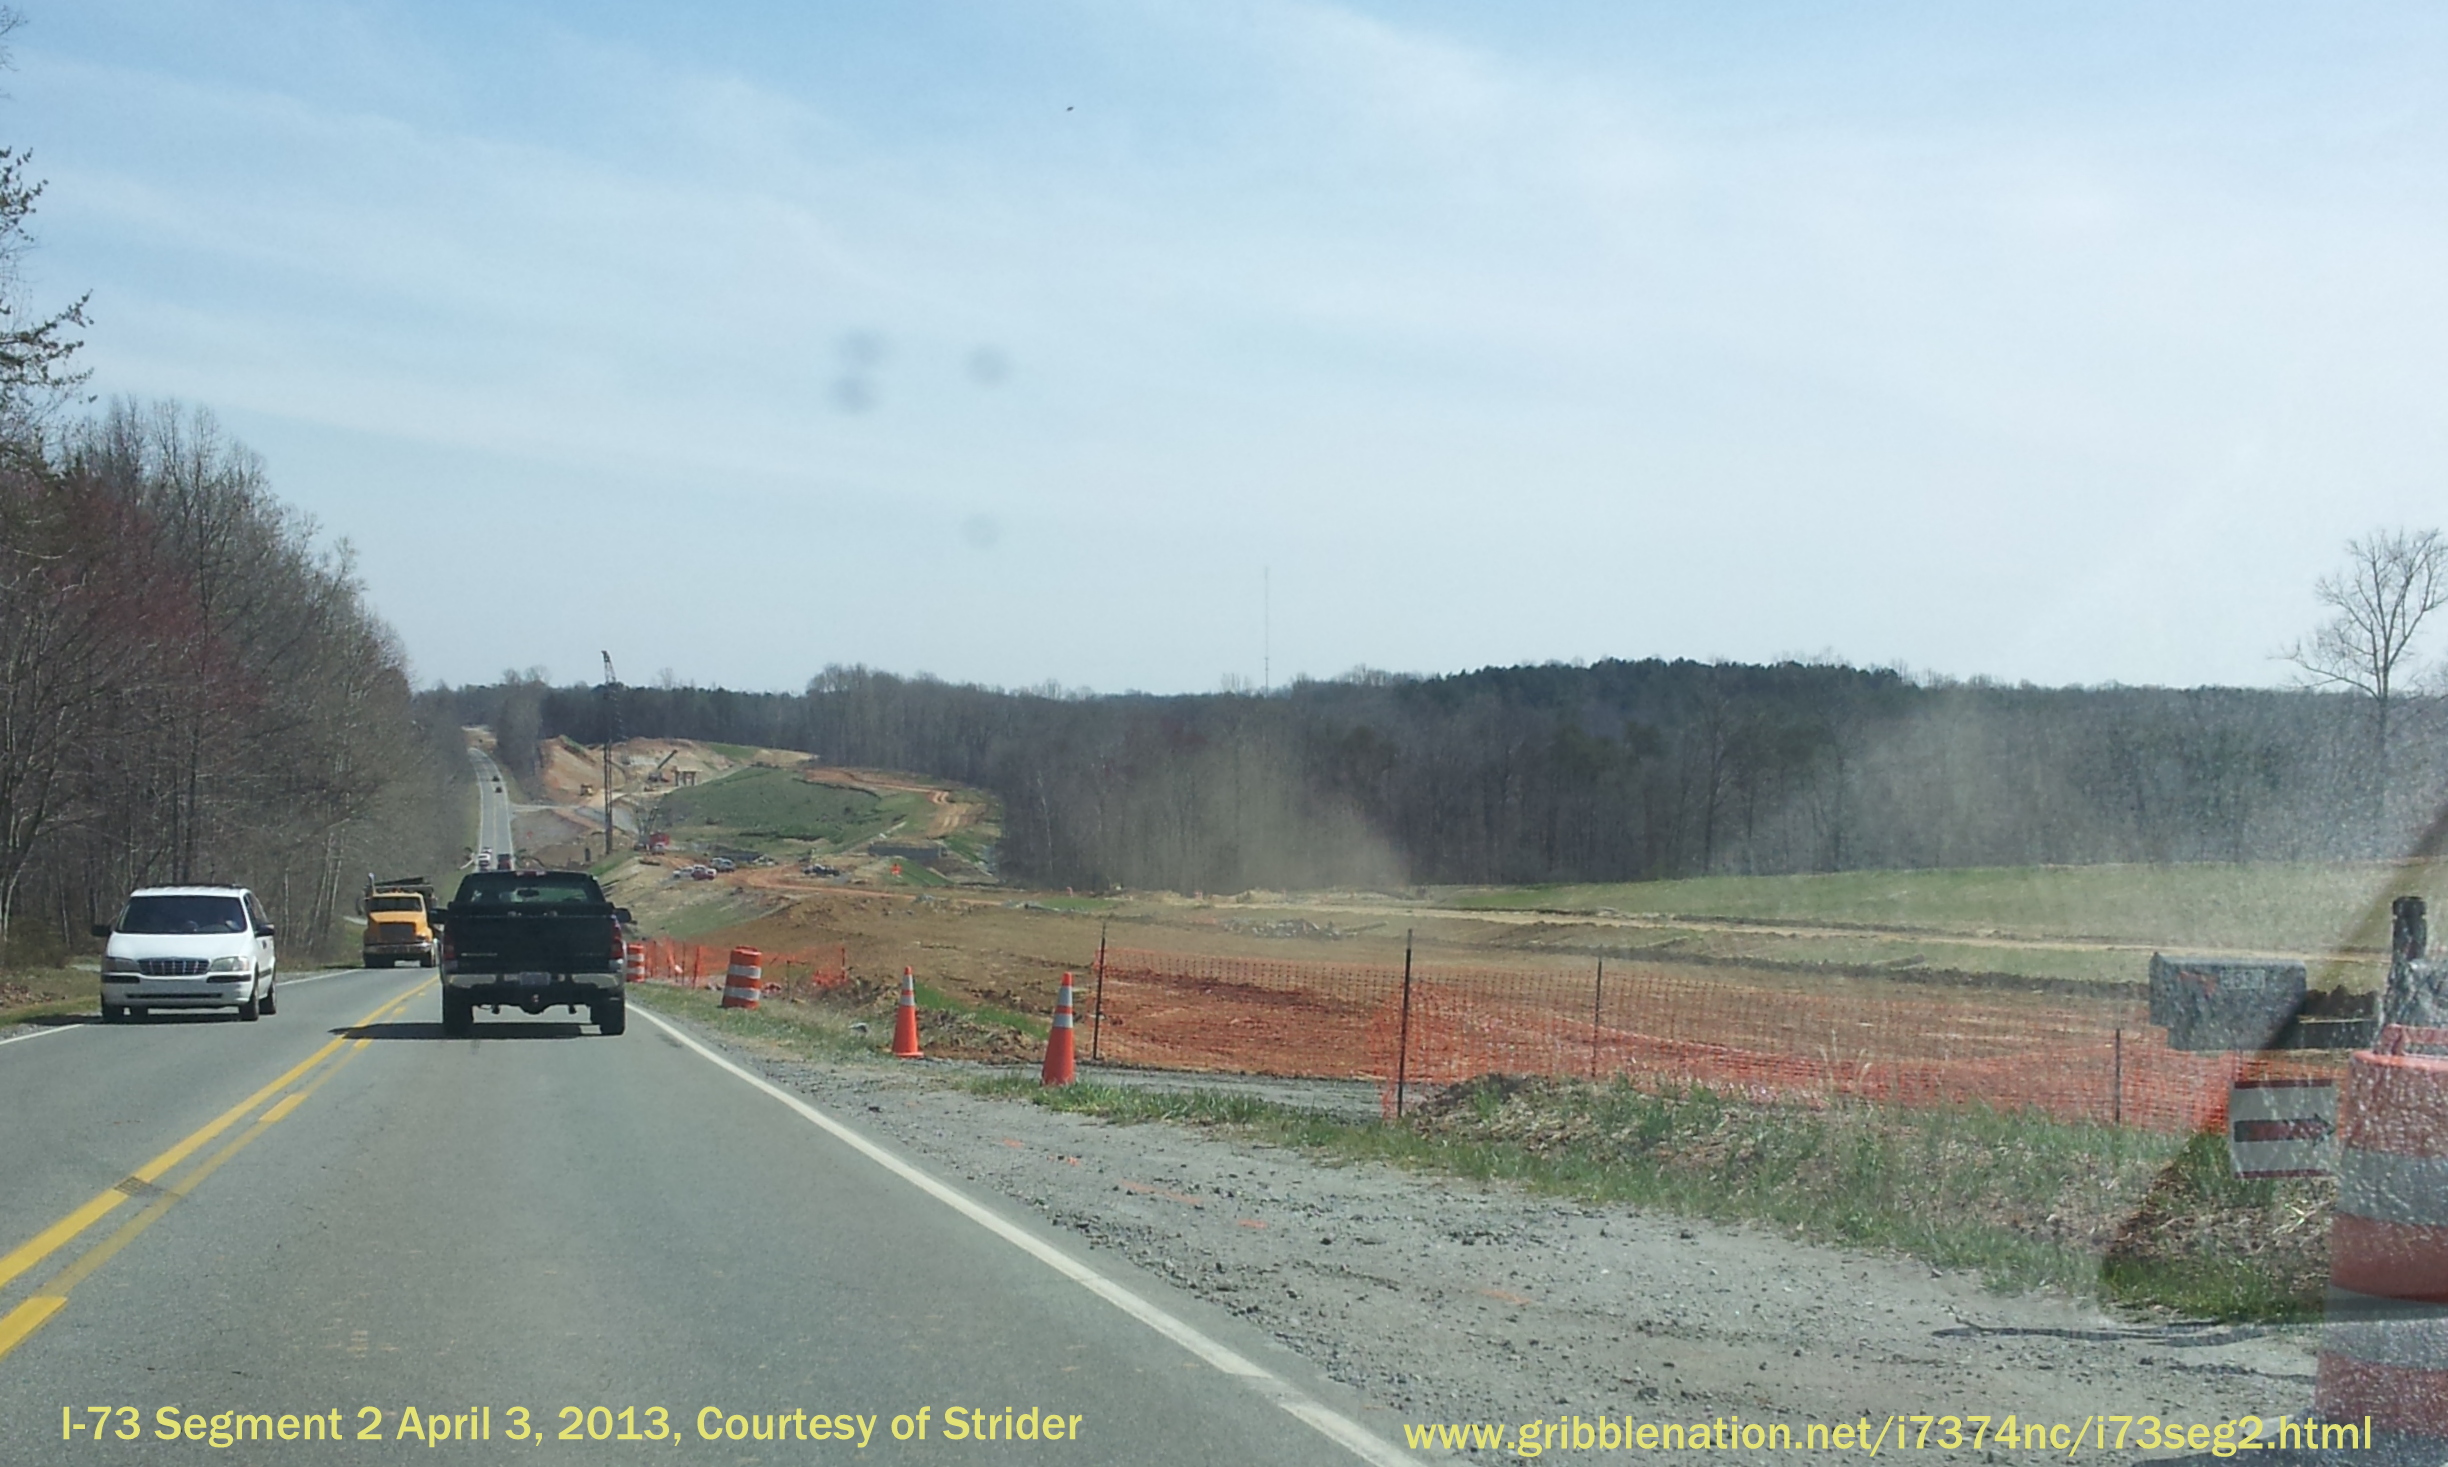 Photo from US 220 South approaching Haw River and Construction of future 
interchange with I-73, courtesy of Strider